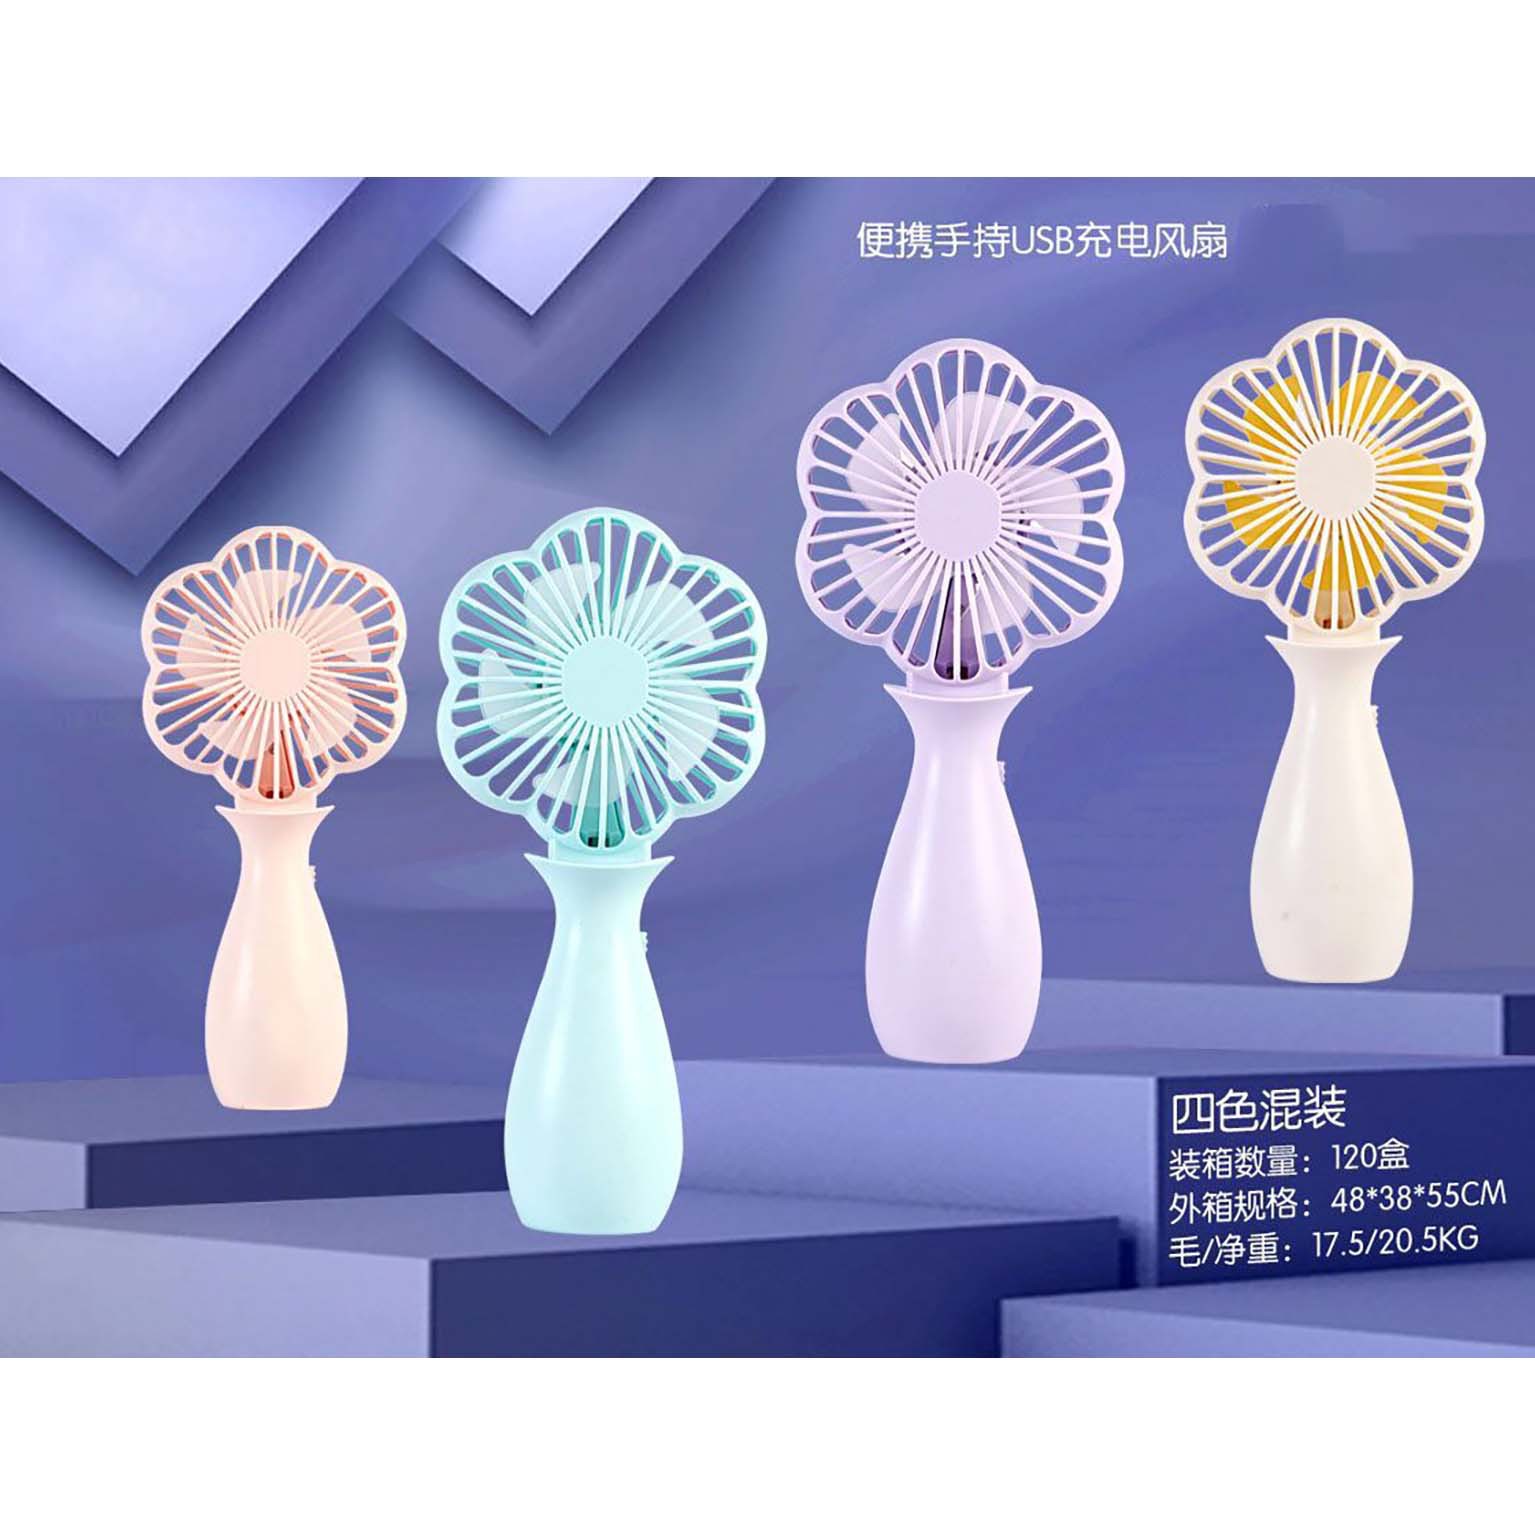 2021 New convenient USB charge Mini Fan student leisure time